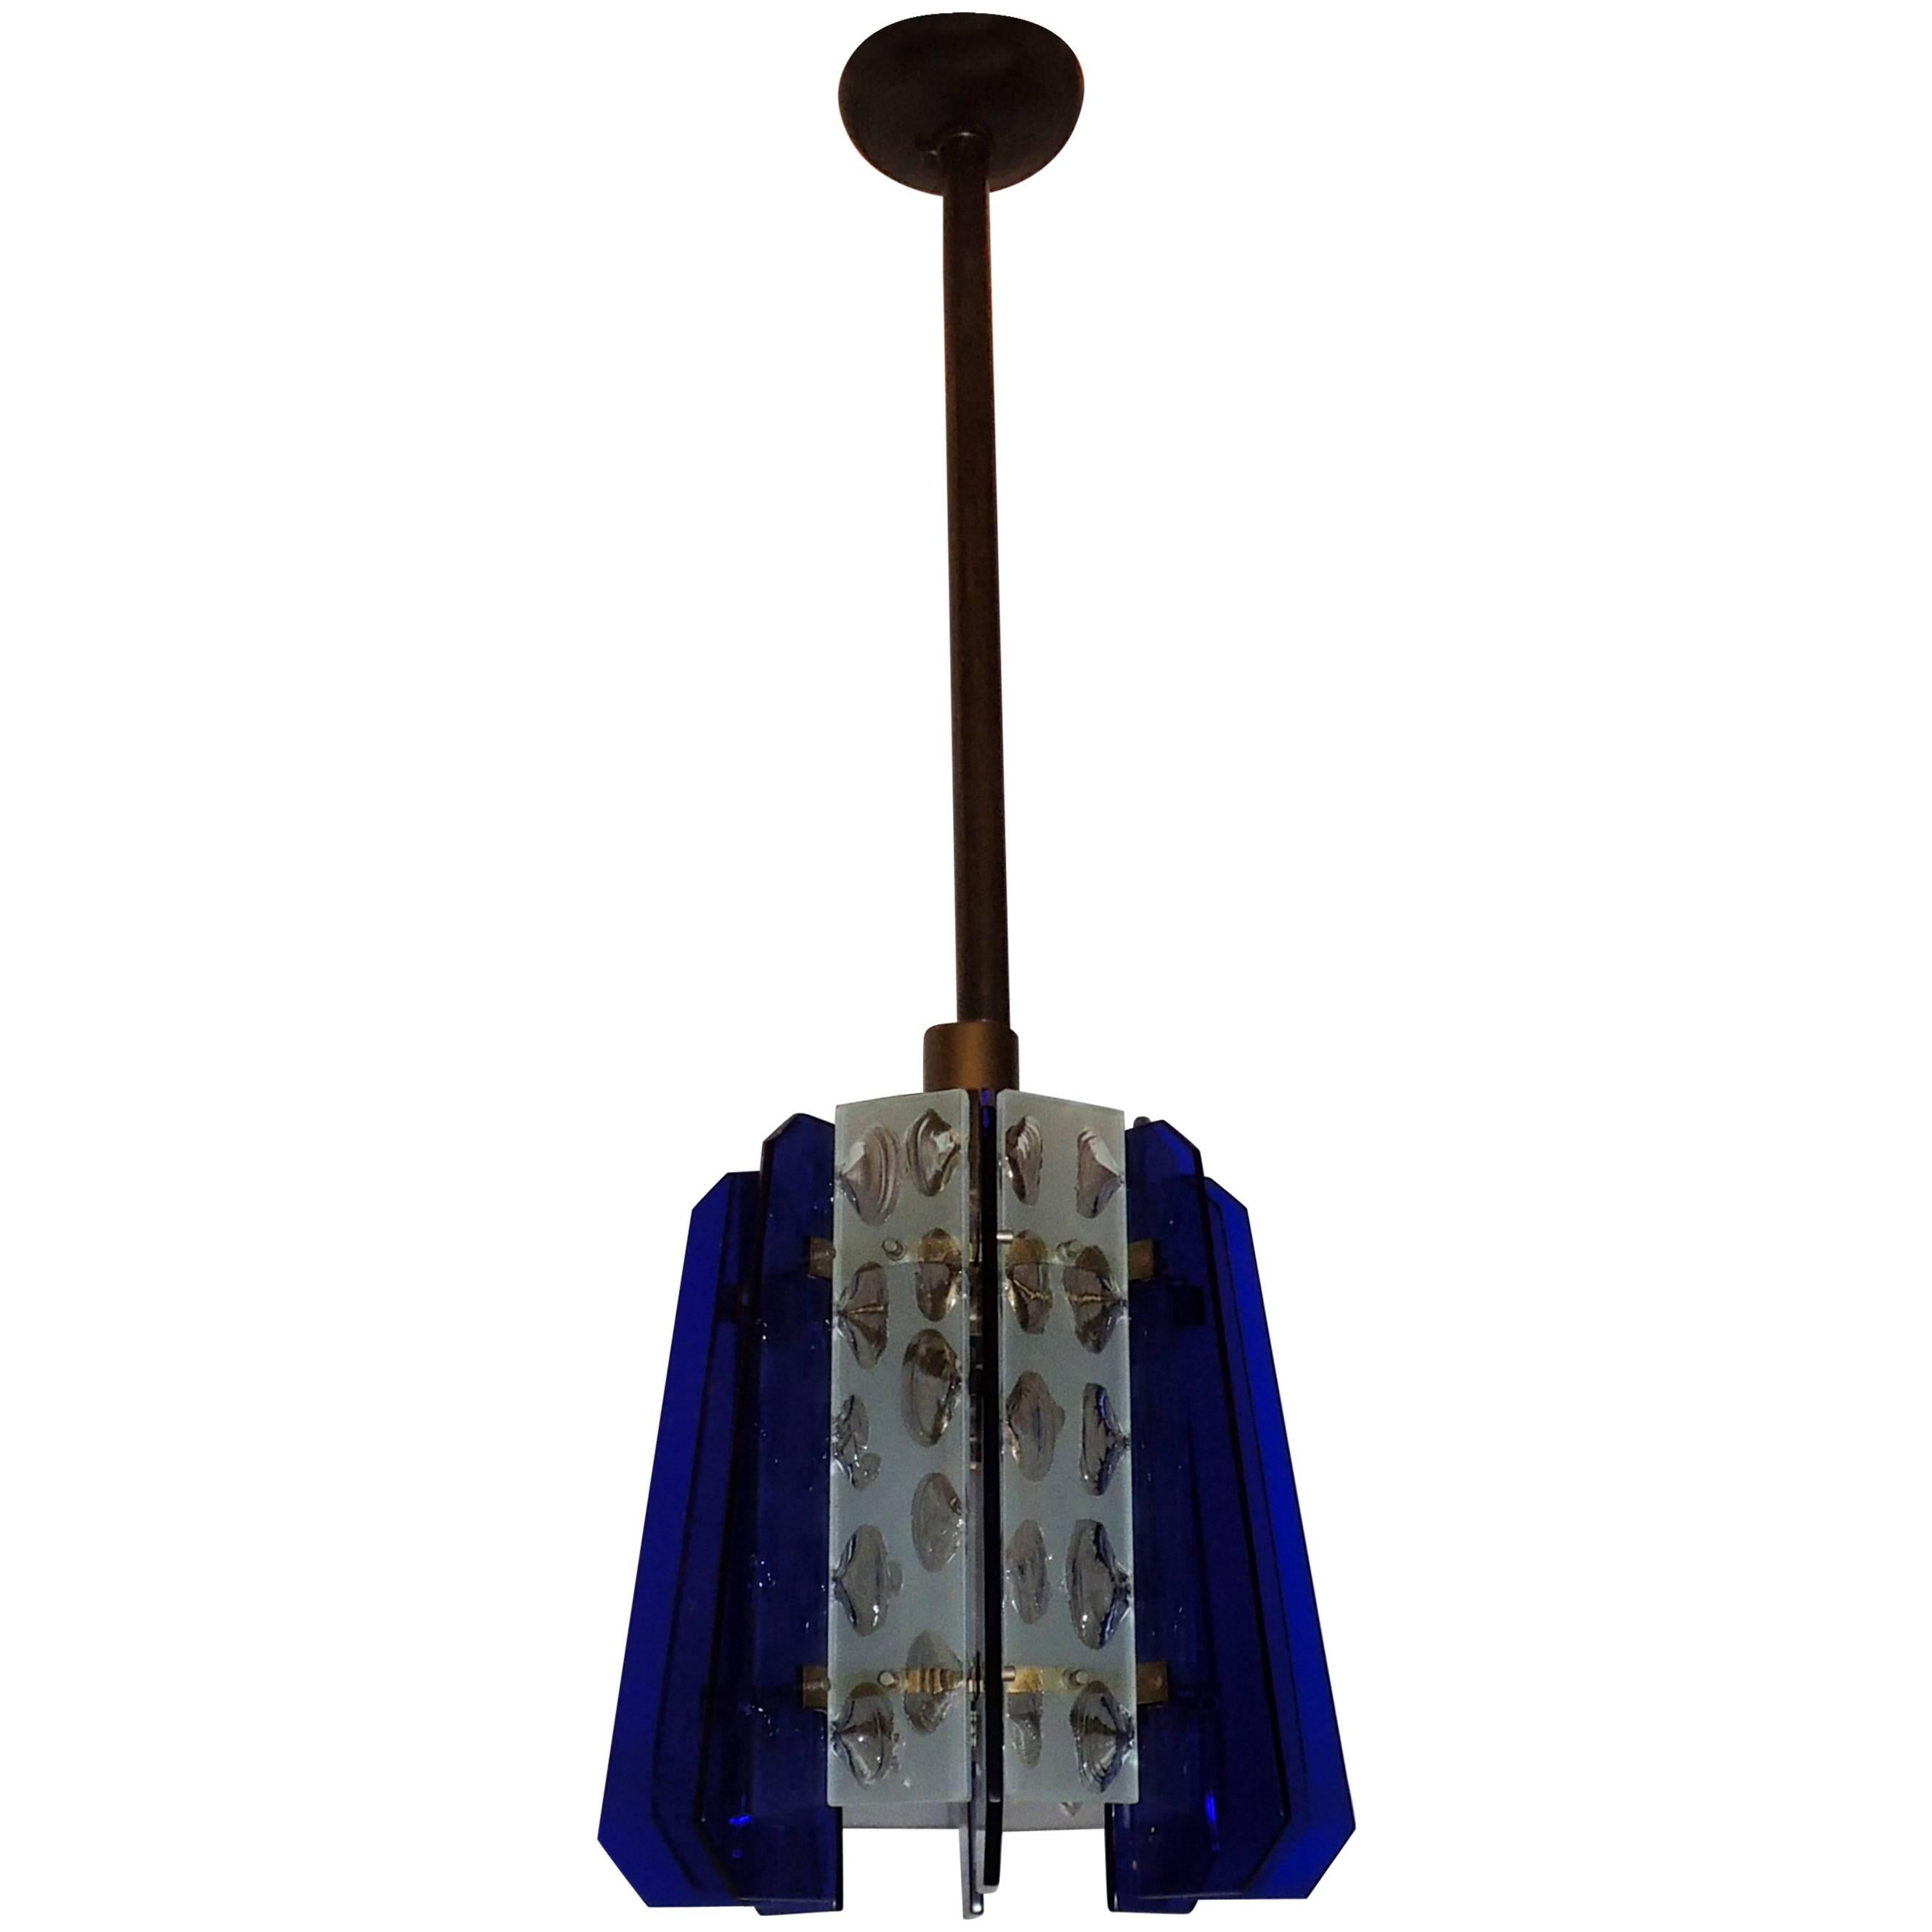 French Art Deco Mid-Century Modern Cobalt Blue Murano Frosted Glass Fixture